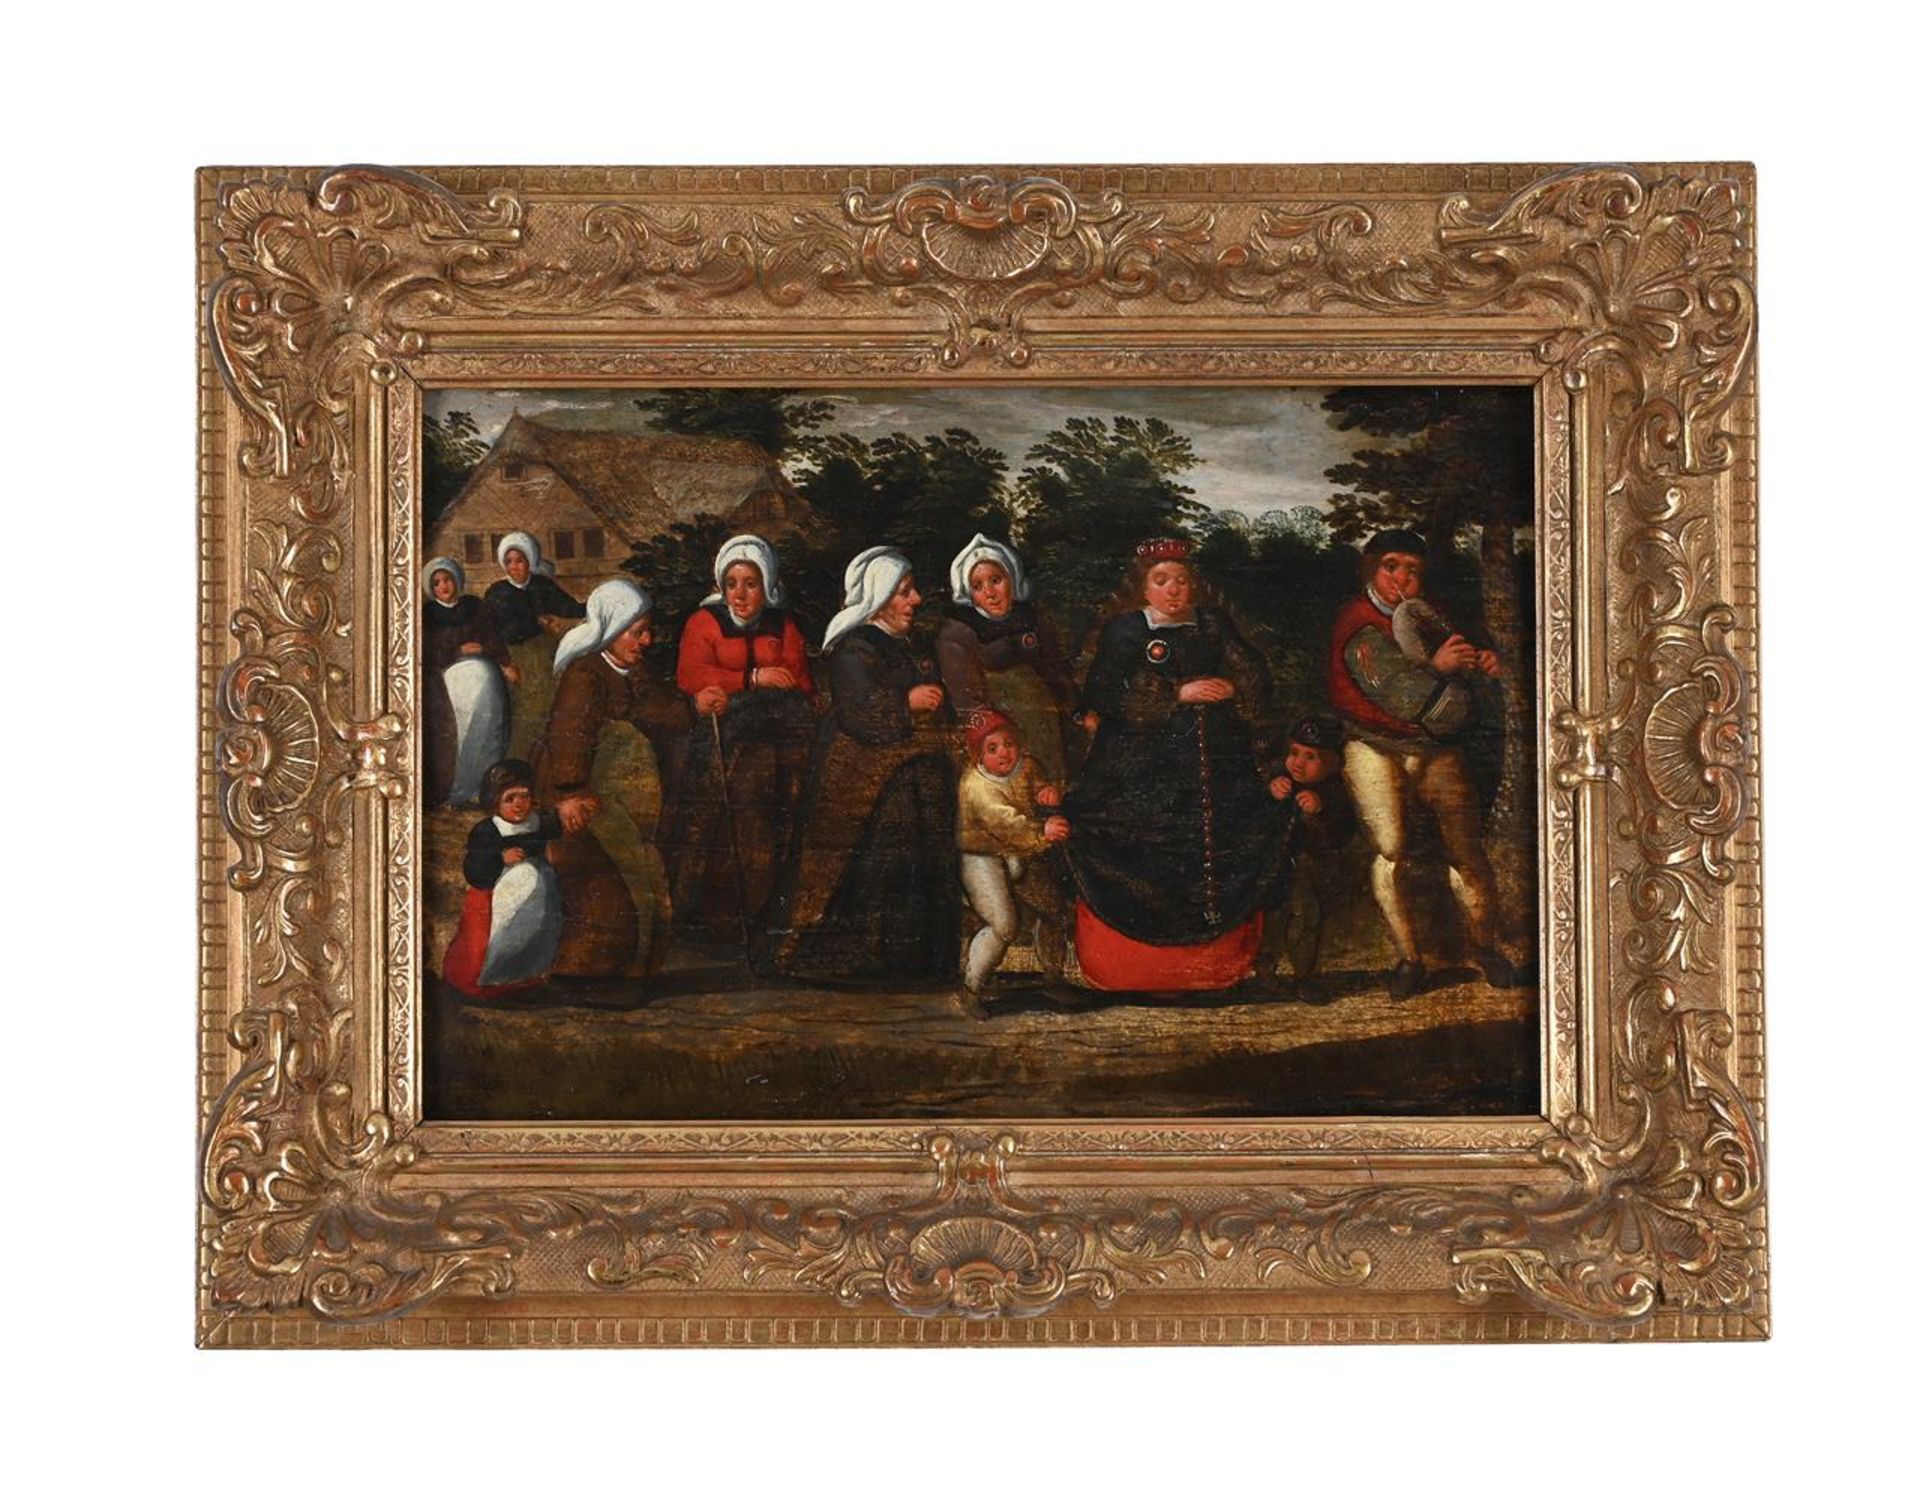 CIRCLE OF PIETER BREUGHEL THE YOUNGER (FLEMISH CIRCA 1565-CIRCA 1636), A PROCESSION OF FIGURES - Image 2 of 3